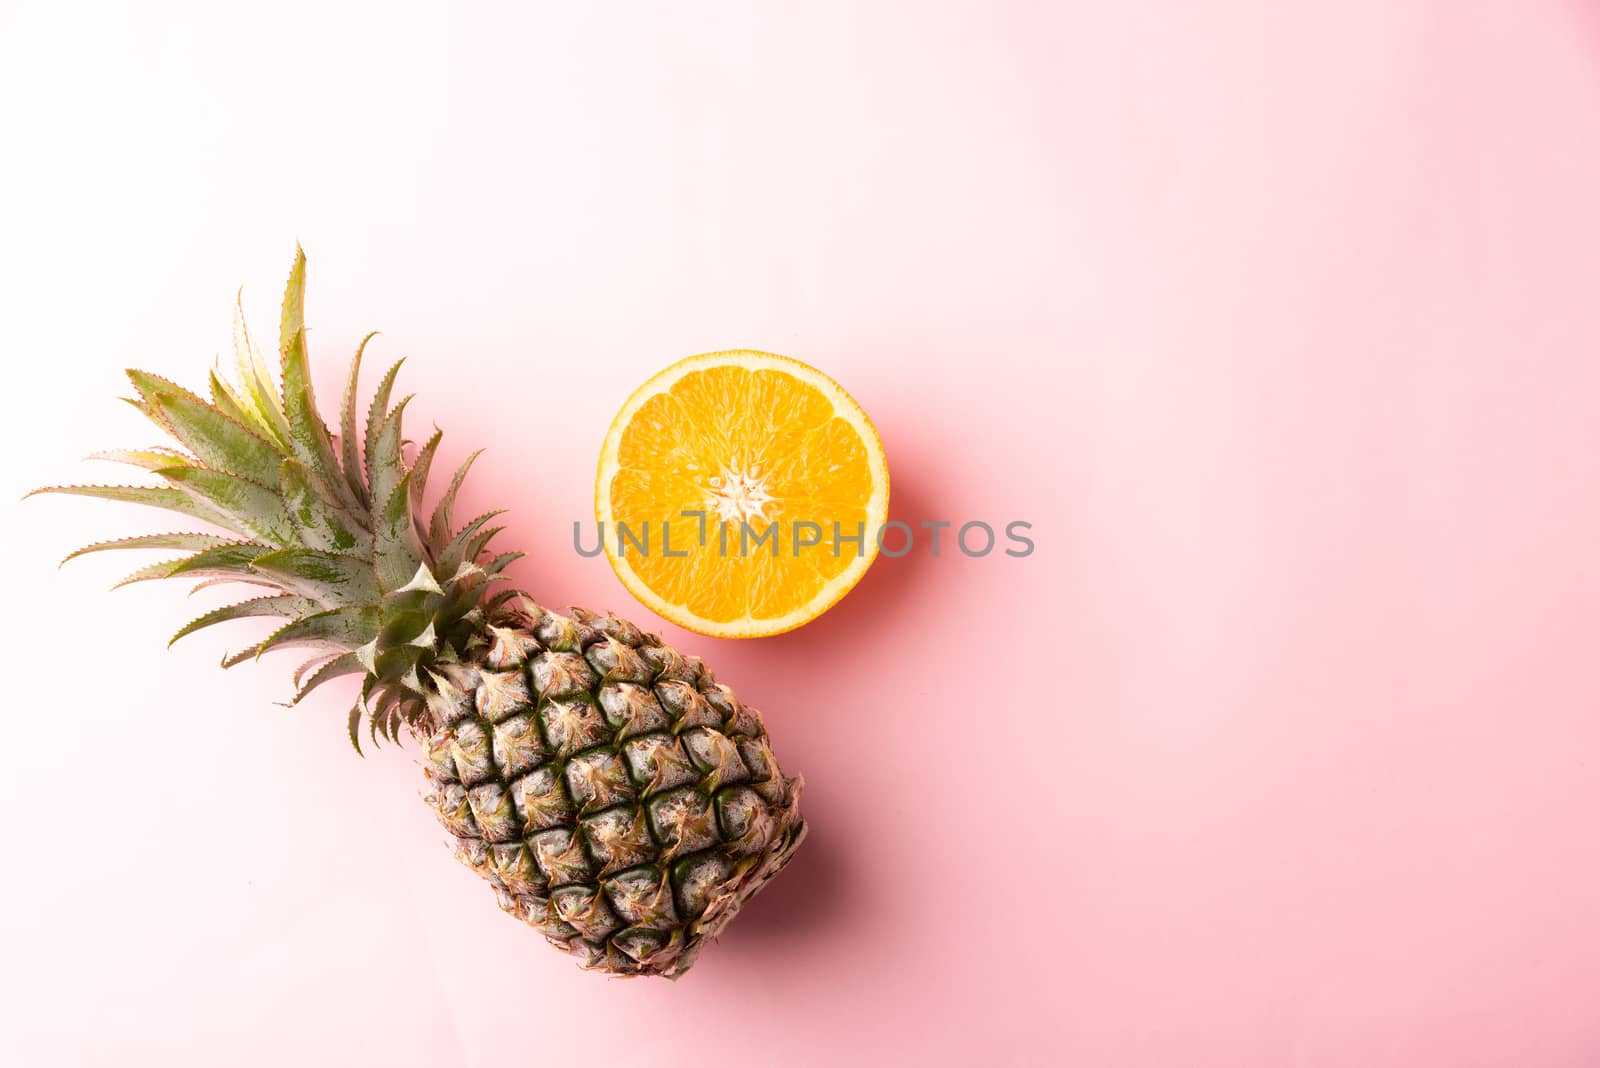 Close up above top view of ripe pineapple and orange fruit on pink pastel background, Summer Tropical, Healthy lifestyle diet food concept